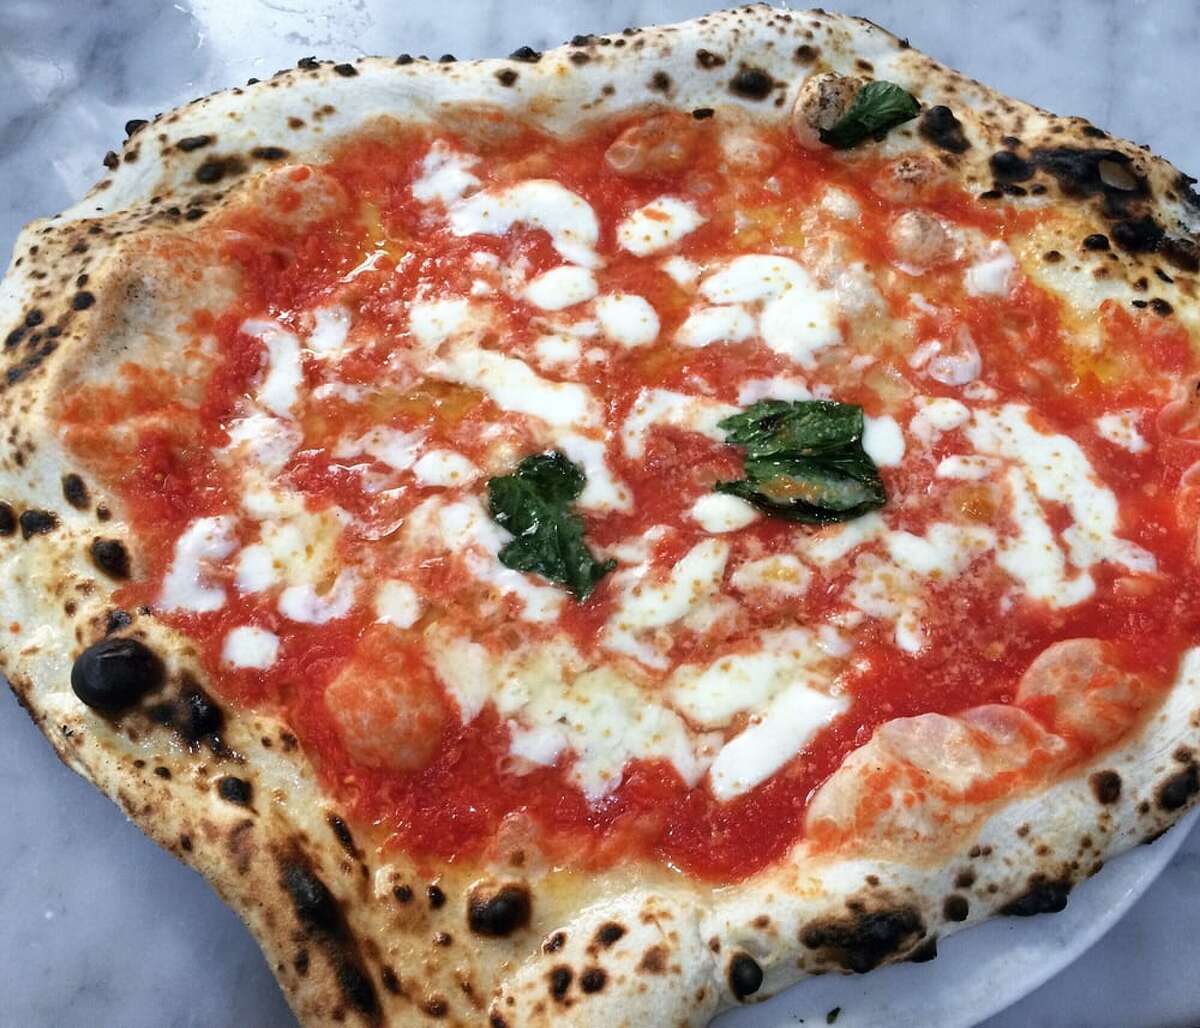 Da Michele that's located in Naples, Italy and featured in "EAT, PRAY, LOVE" will open it's first US outpost in LA. 